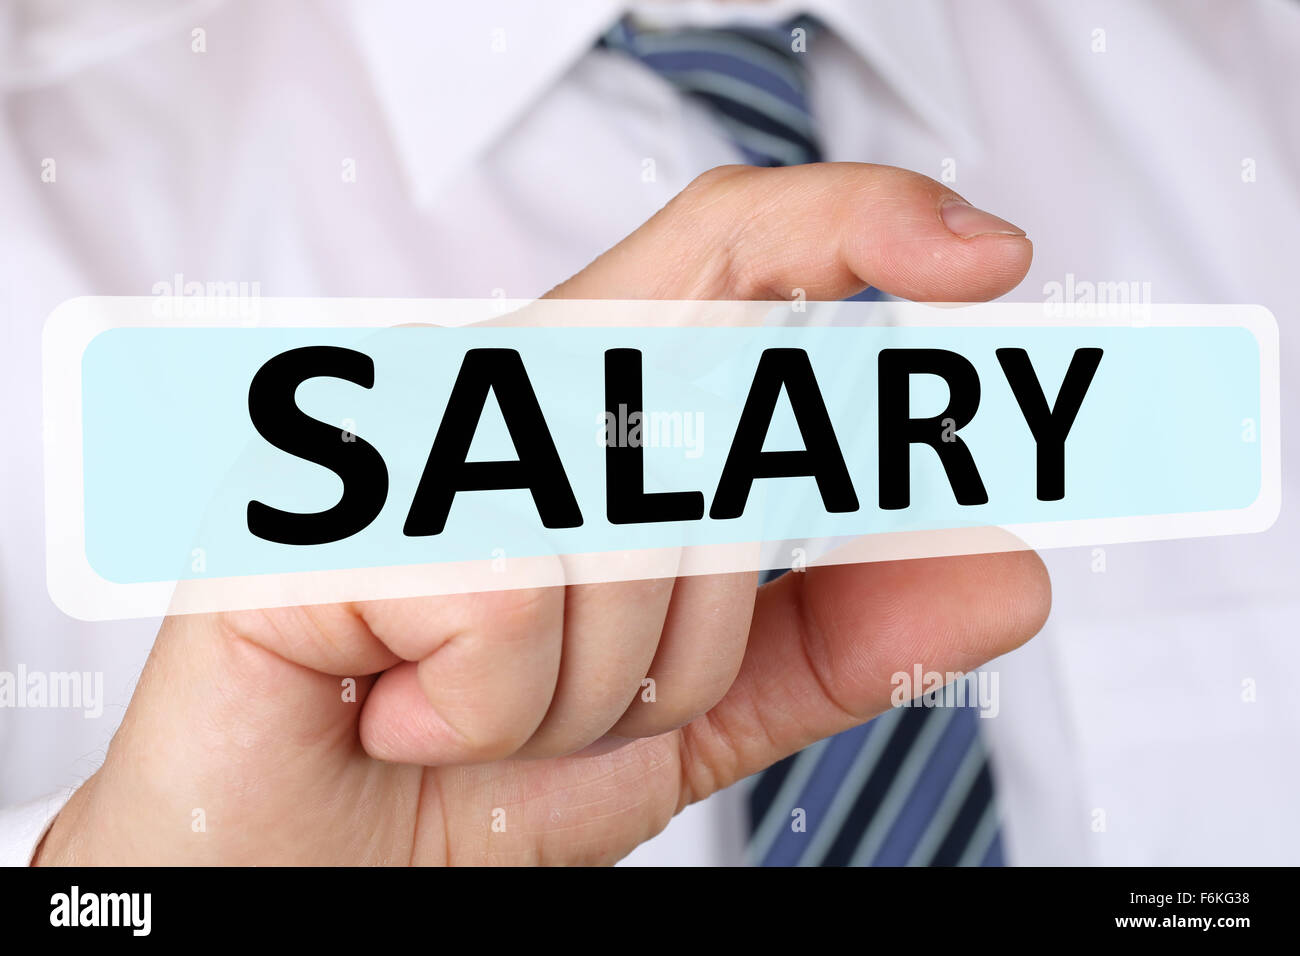 Businessman business concept with salary wages money finance boss employee Stock Photo